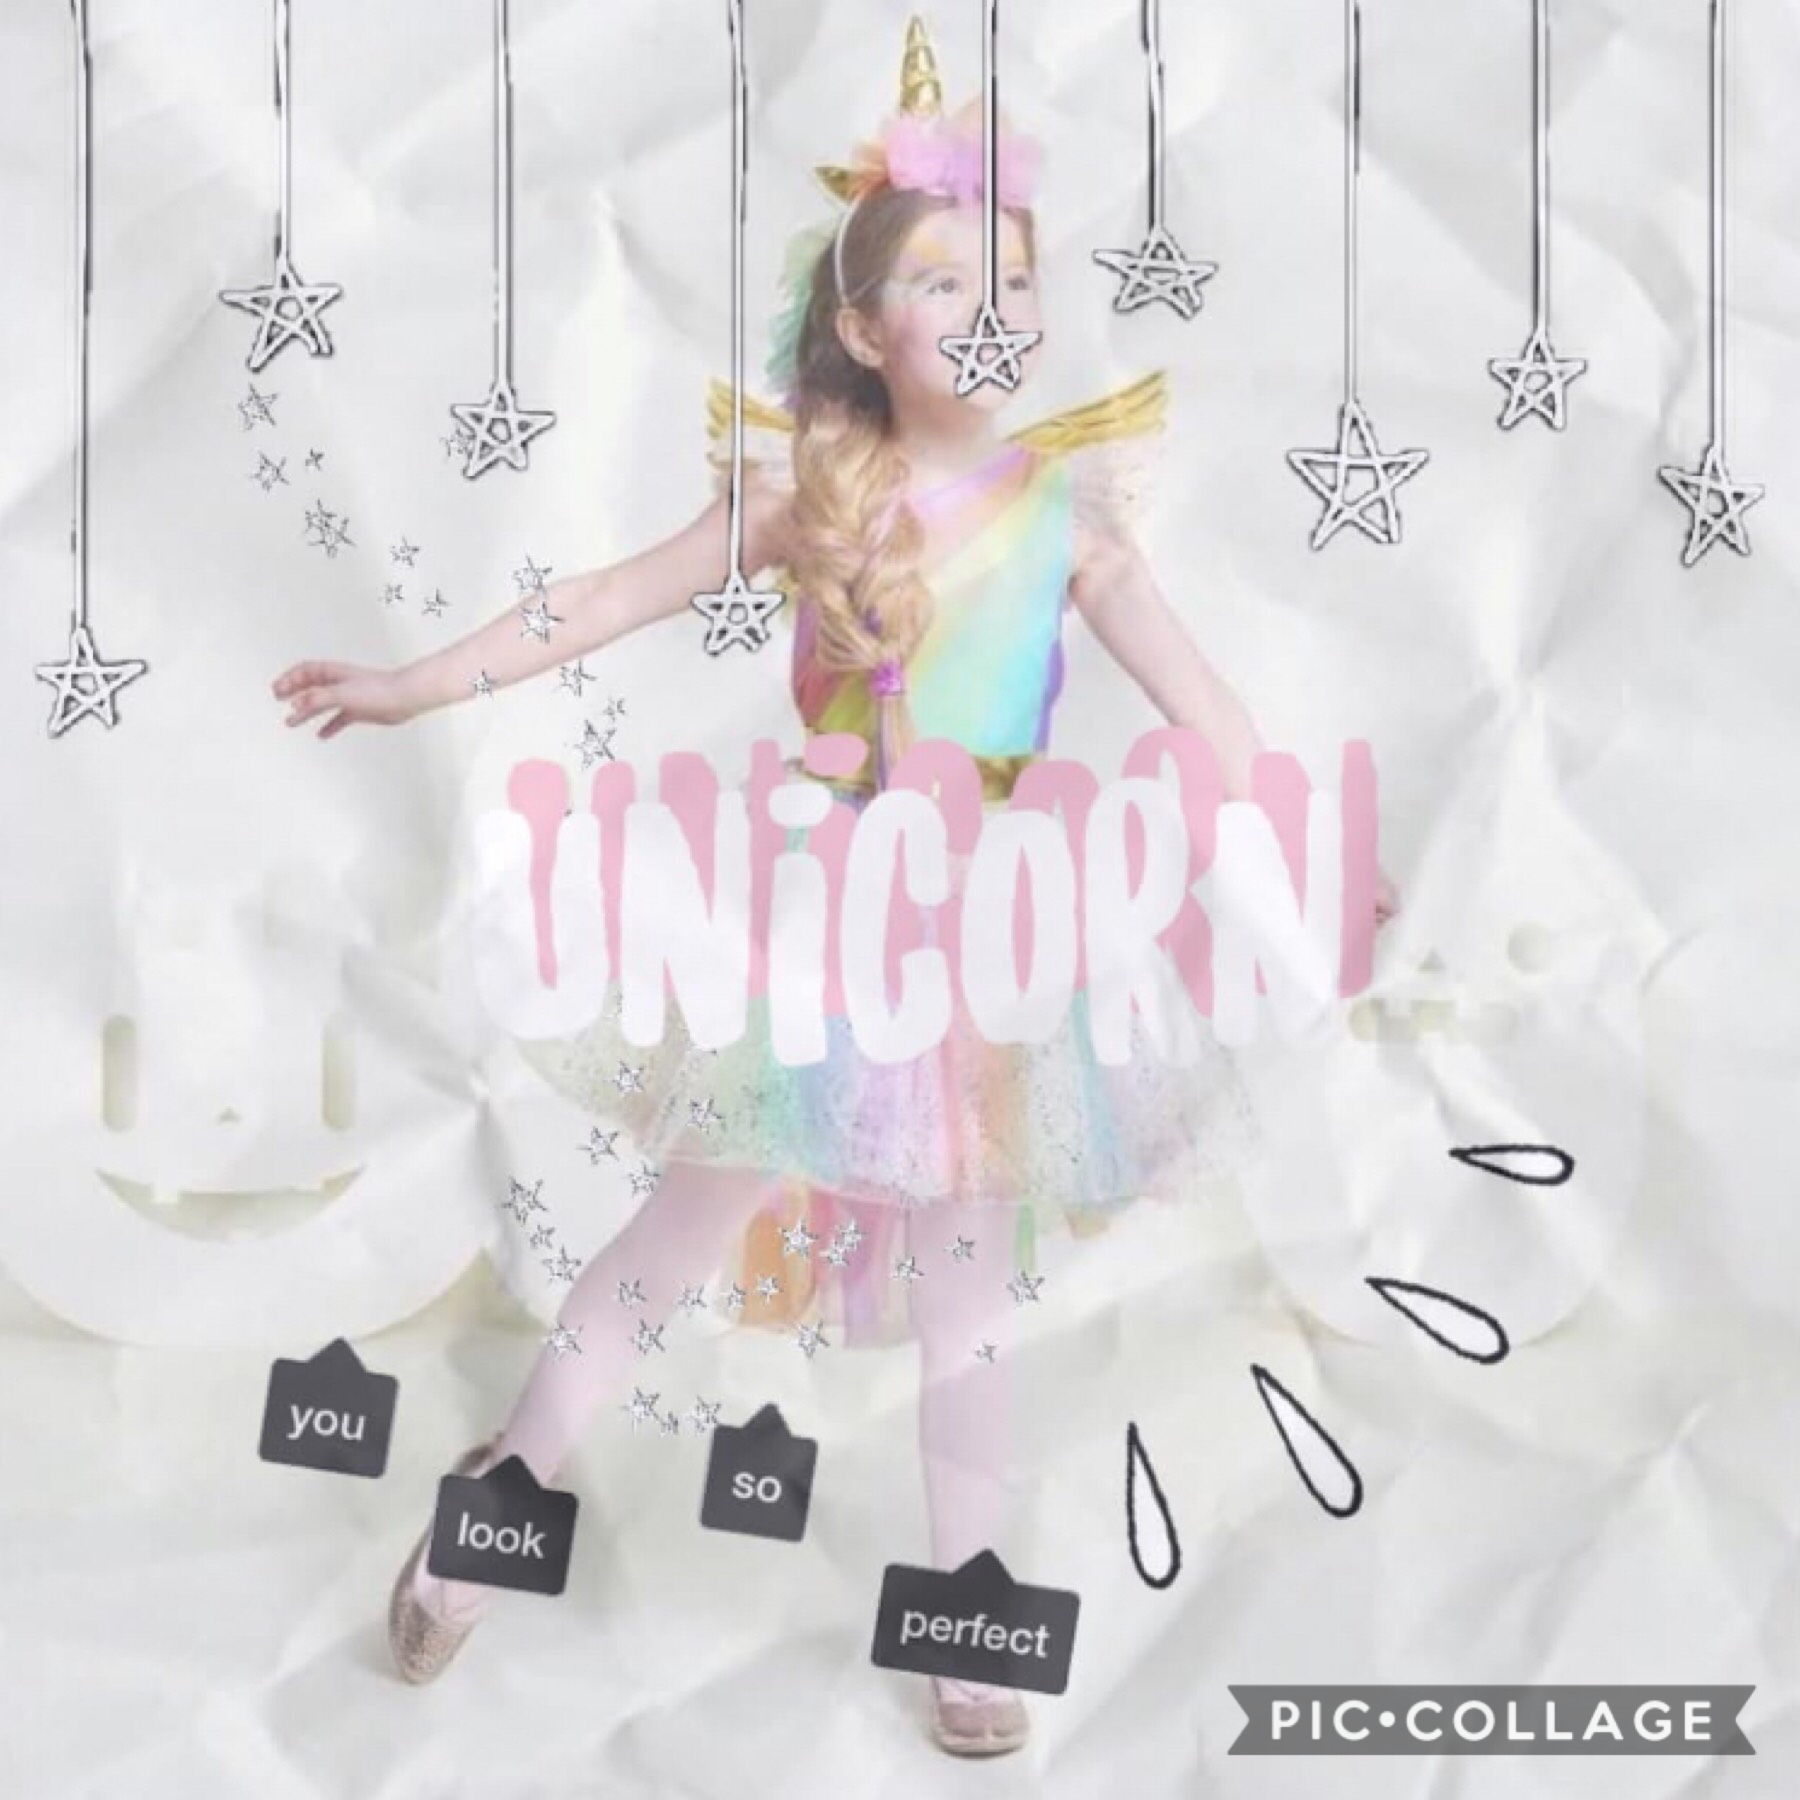 I am going to be Unicorn for Halloween!!!!!! What are you going to be?